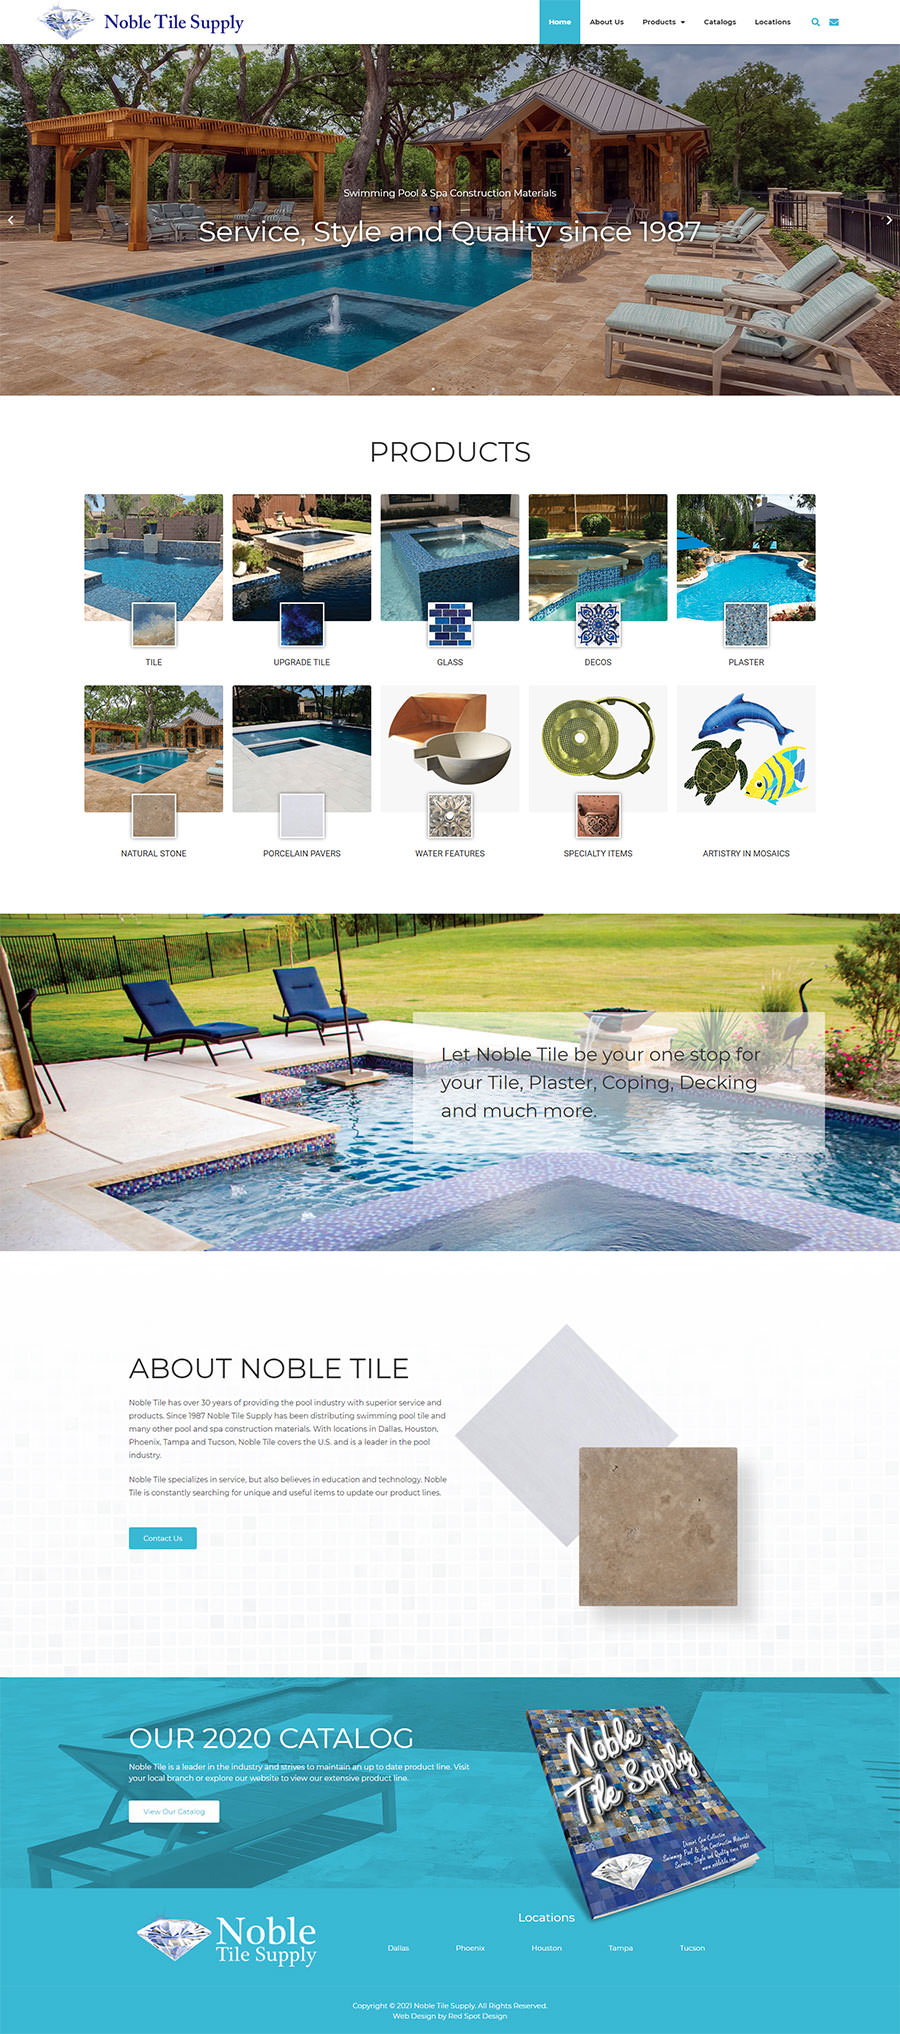 New Website For Swimming Pool Spa, Noble Tile Phoenix